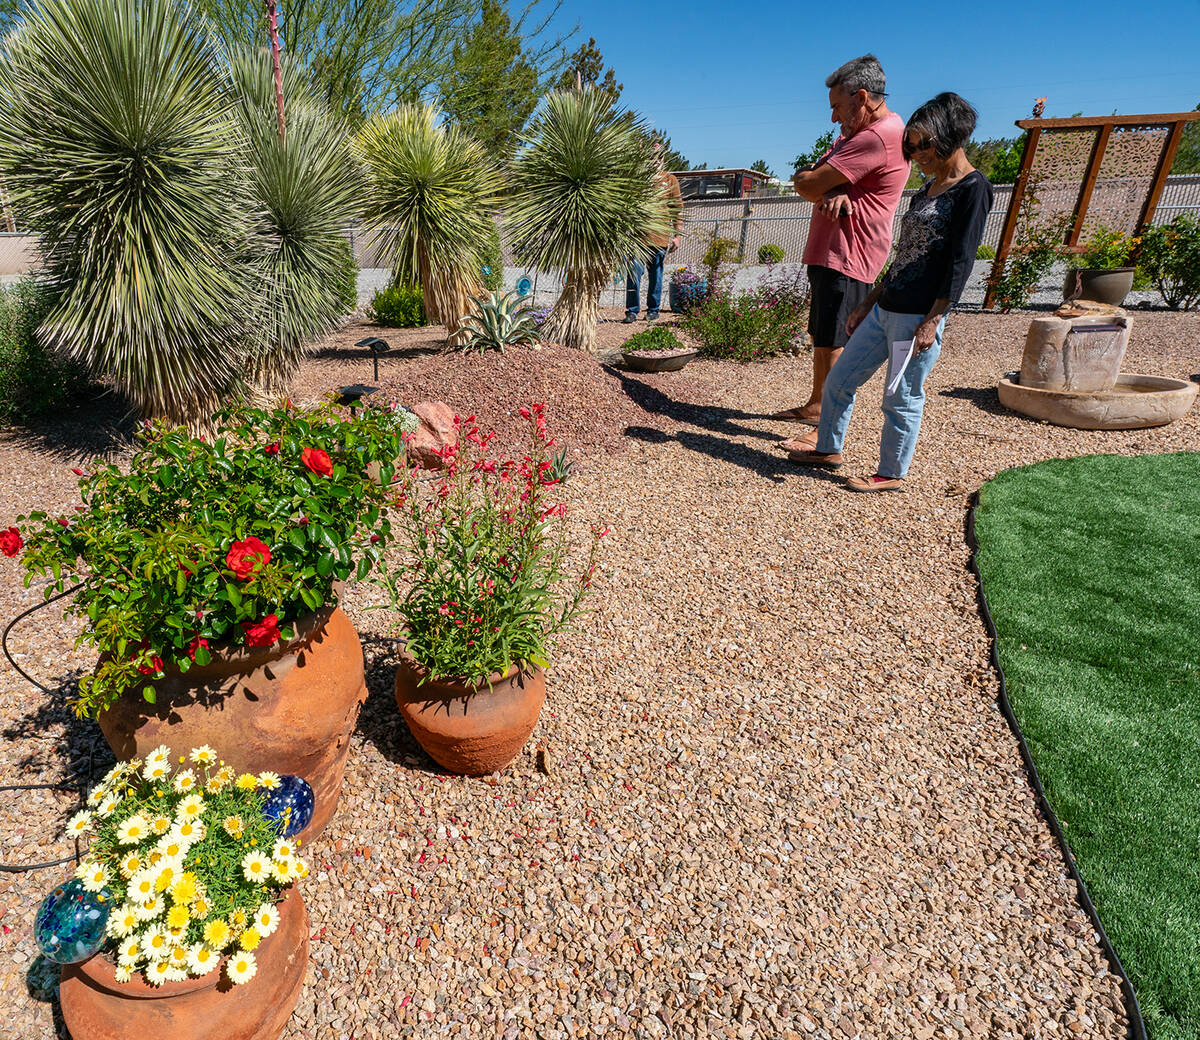 John Clausen/Pahrump Valley Times Landscape Tour attendees stroll down the manicured path past ...